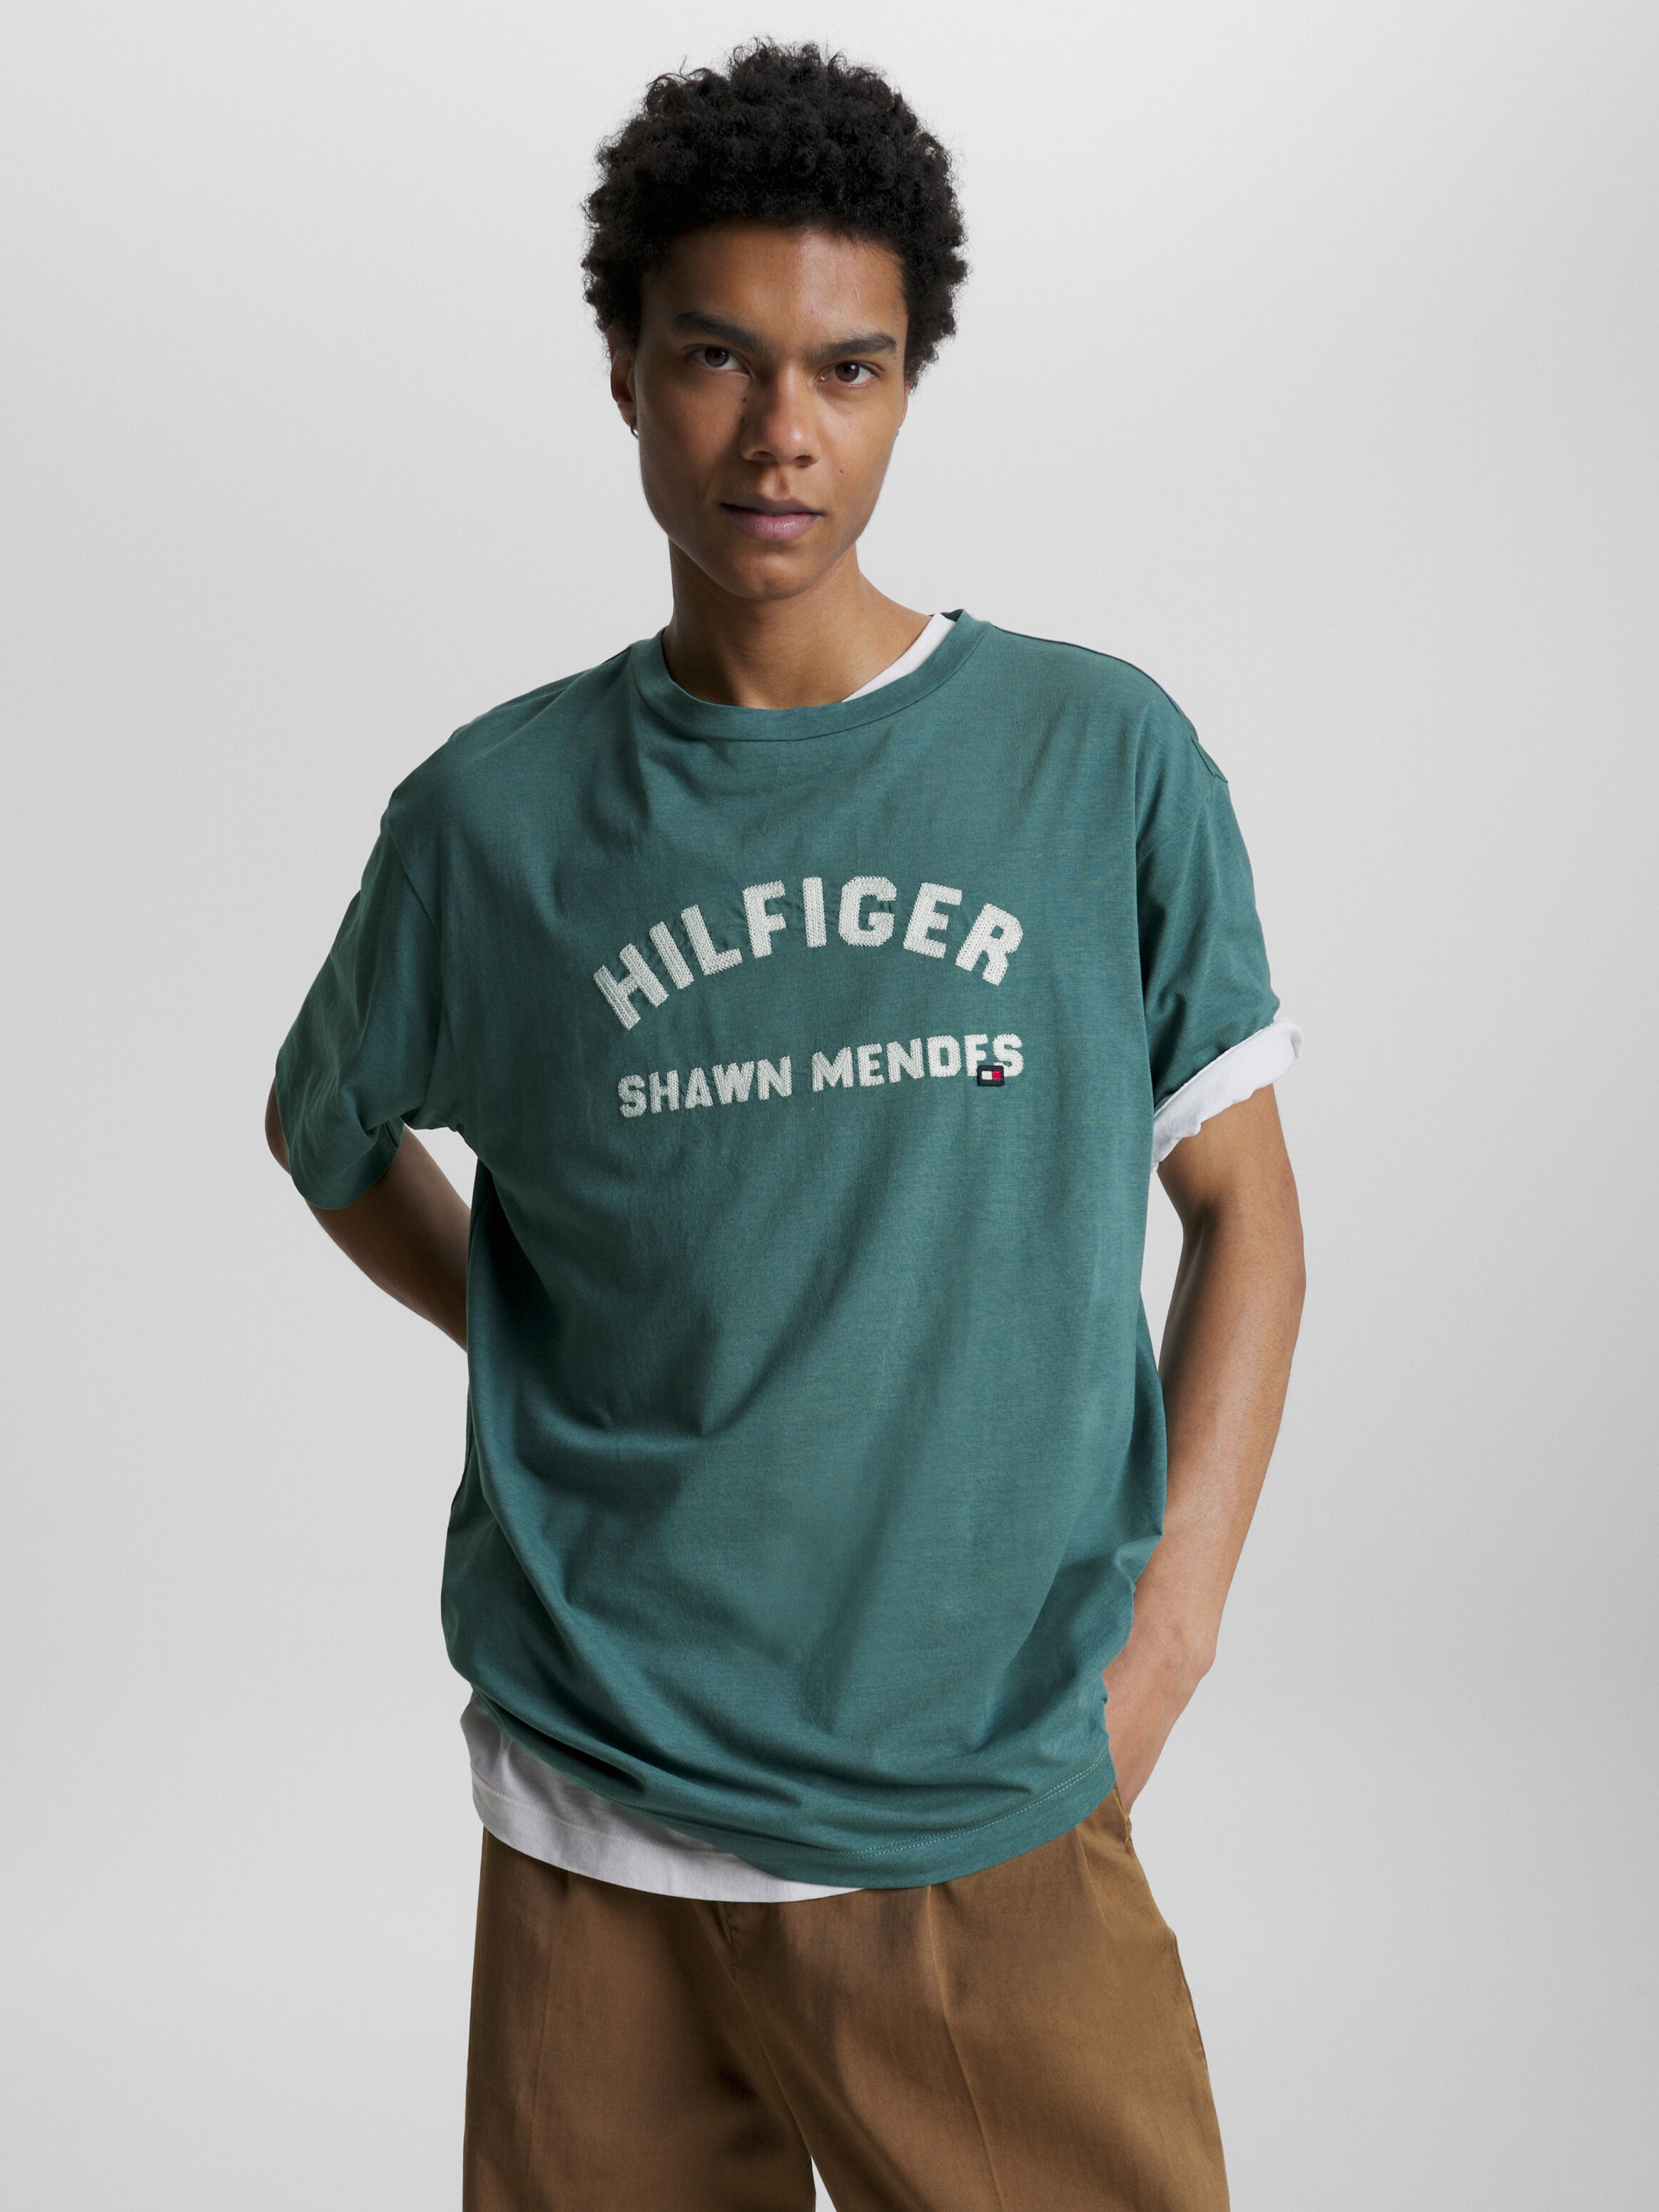 Tommy Hilfiger X Shawn Mendes 復刻 T 恤 Frosted Green